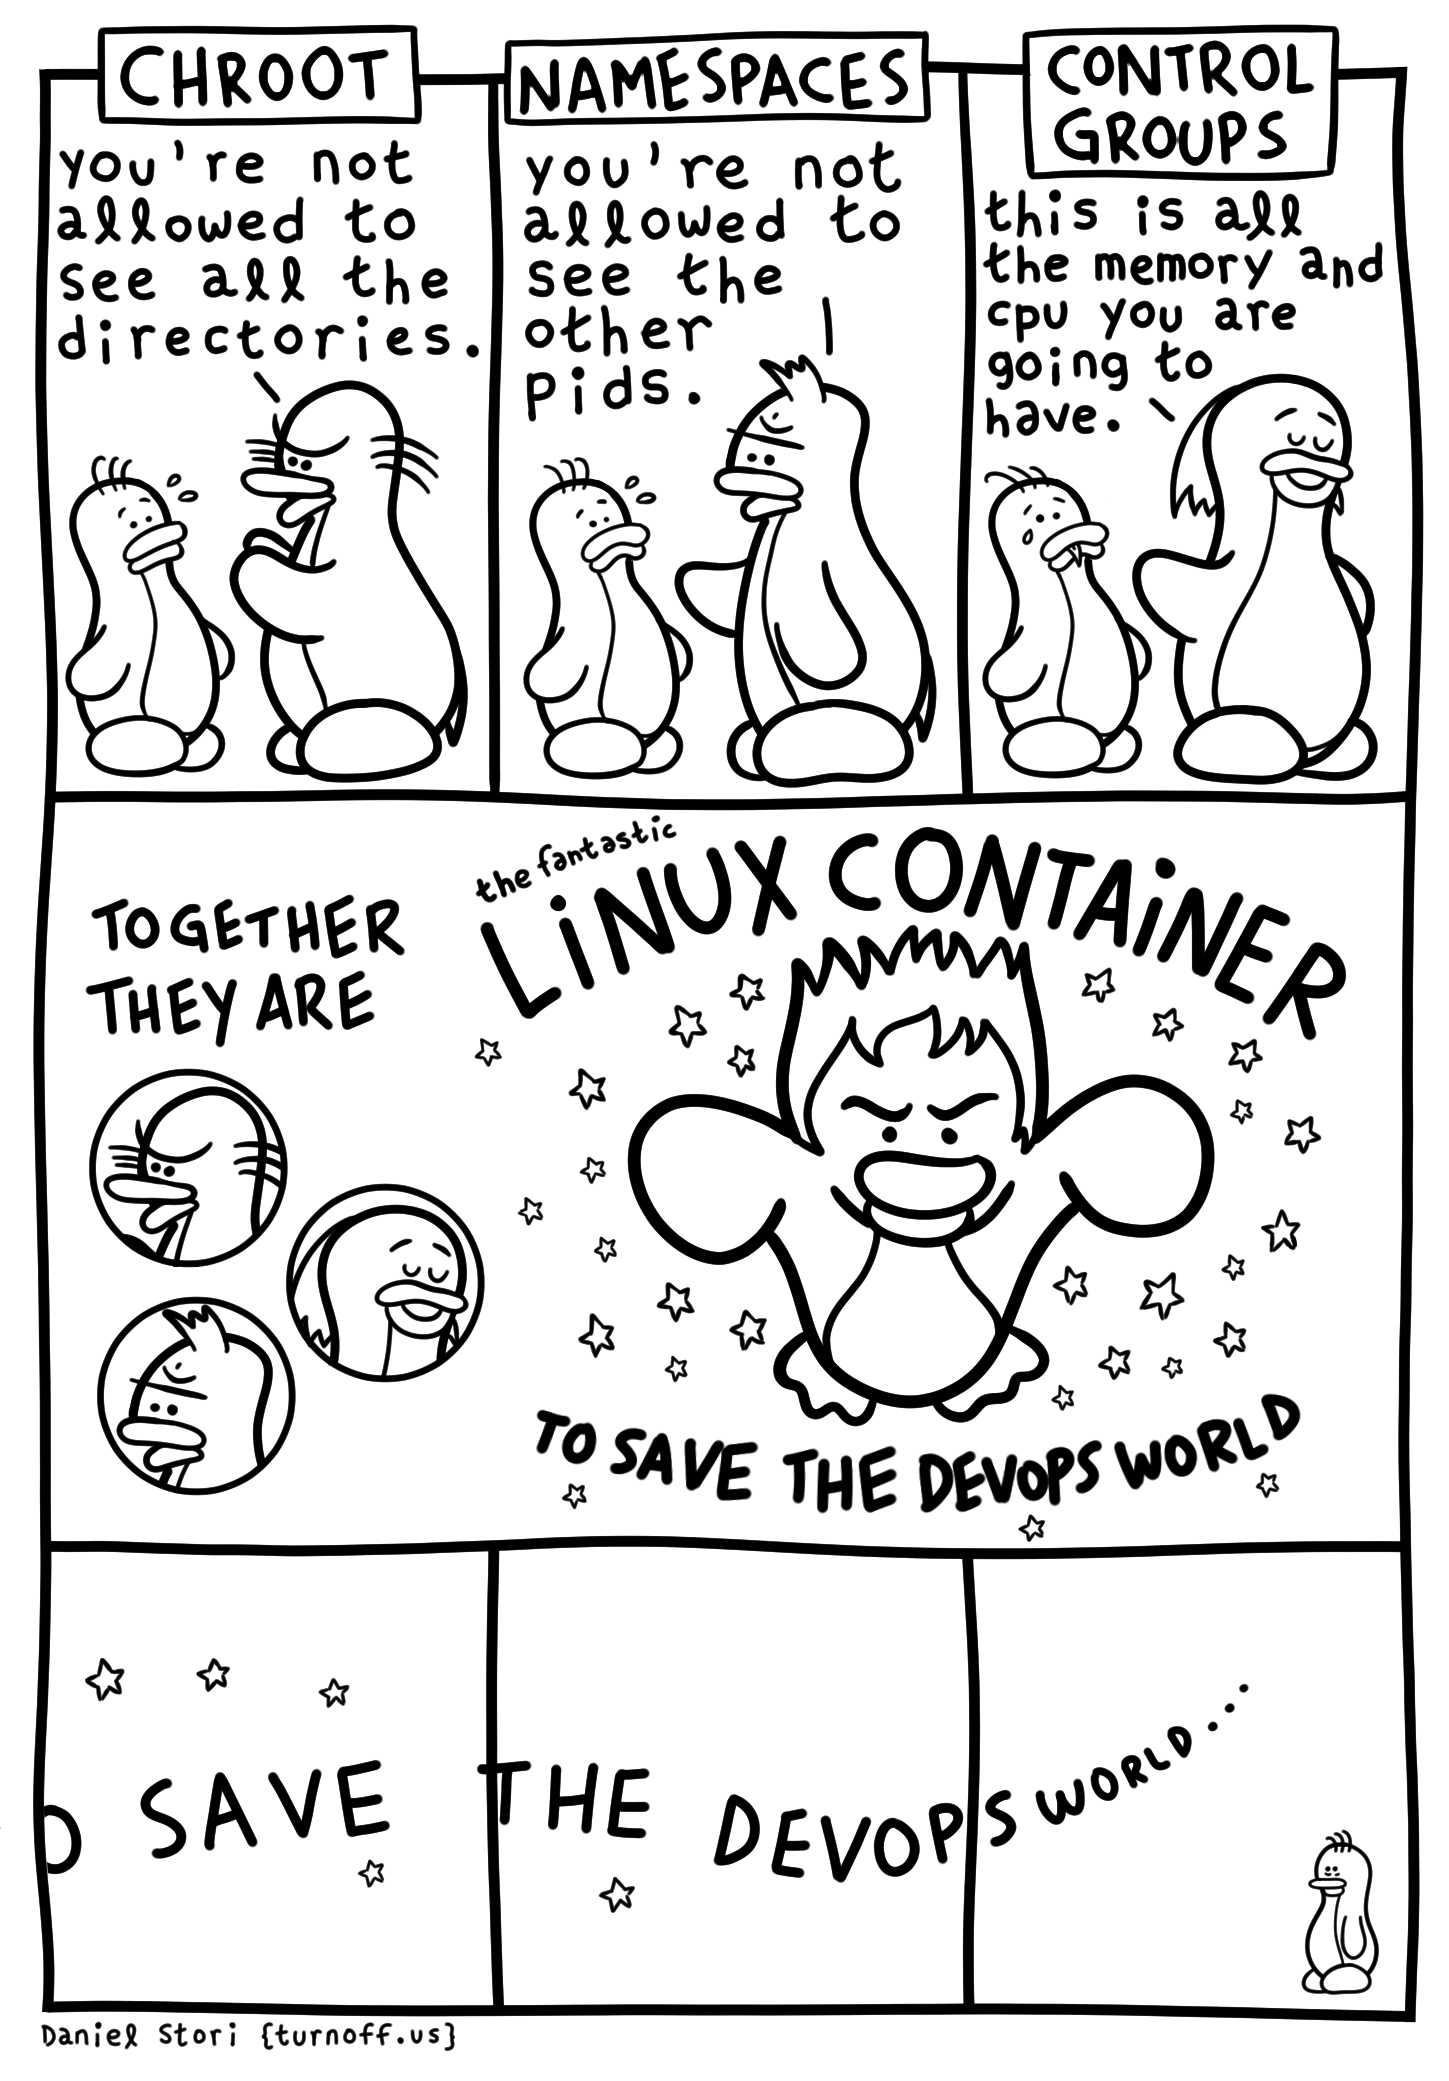 turnoff.us/geek/linux-containers/